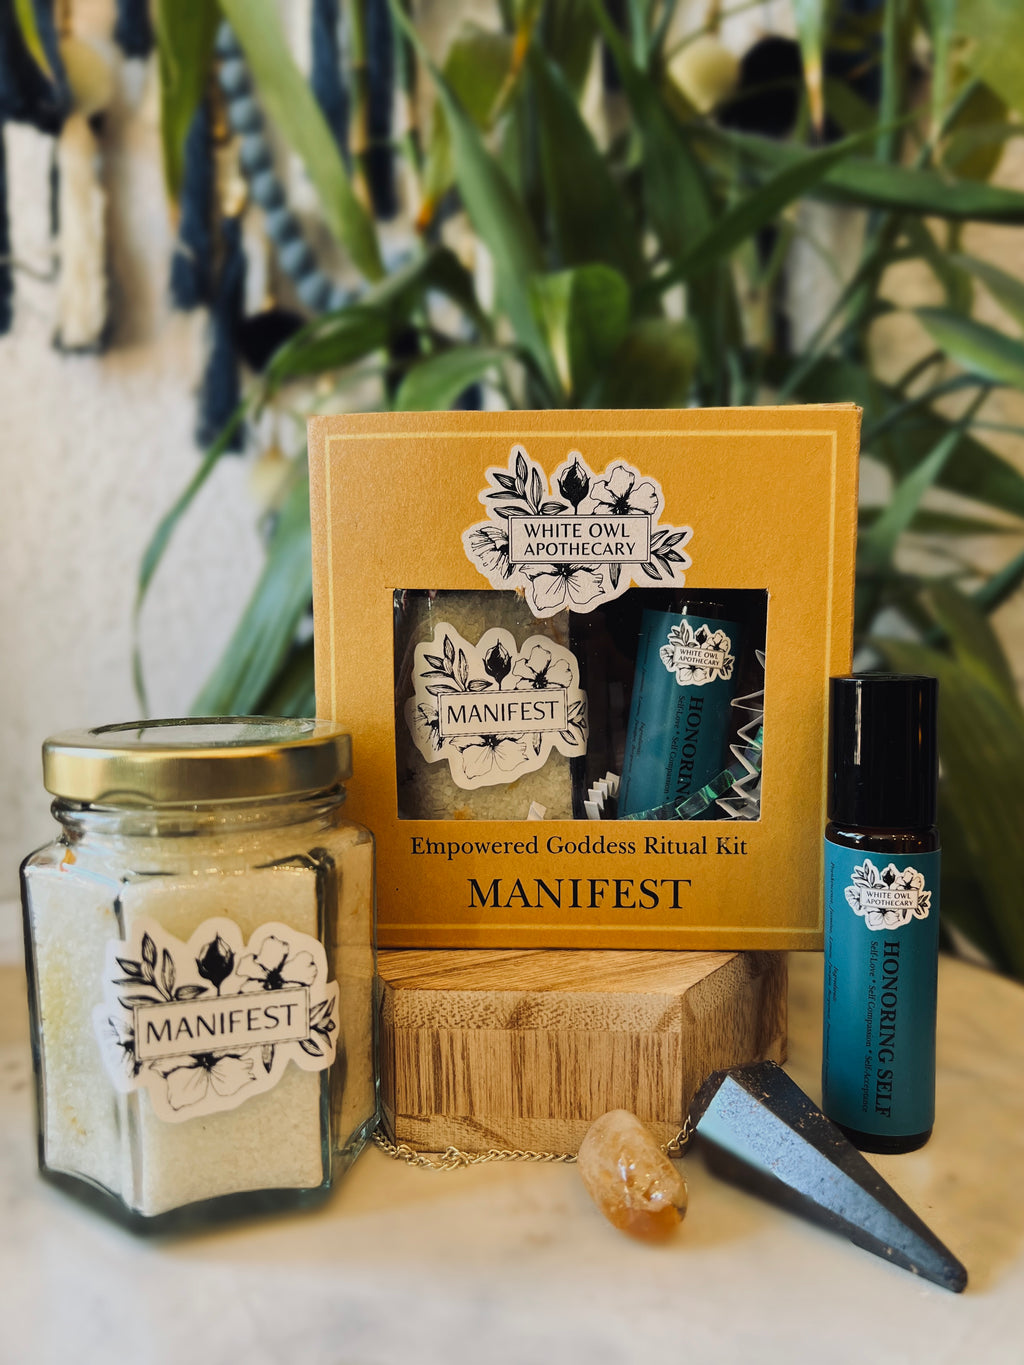 Jasmine Essential Oil at the Dreaming Goddess